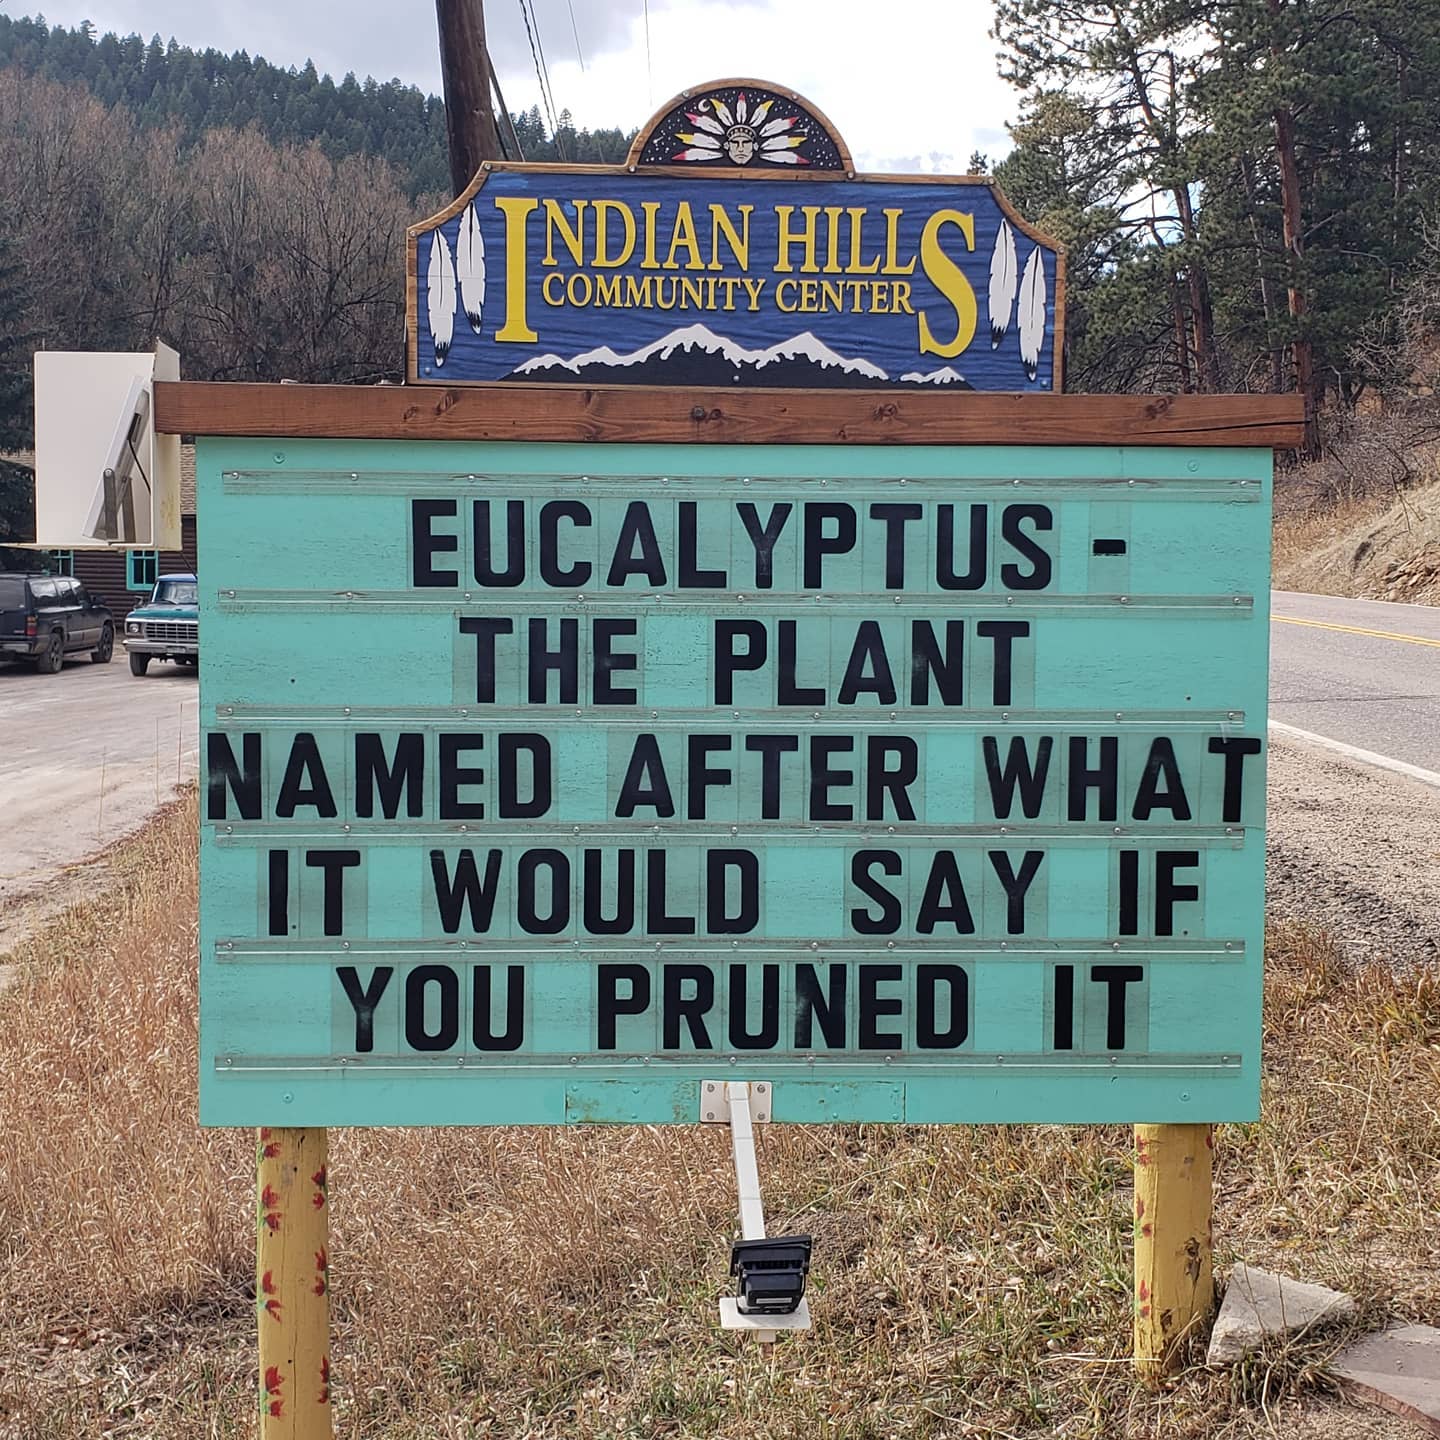 community sign that says: "Eucalyptus the plant named after what it would say if you pruned it"